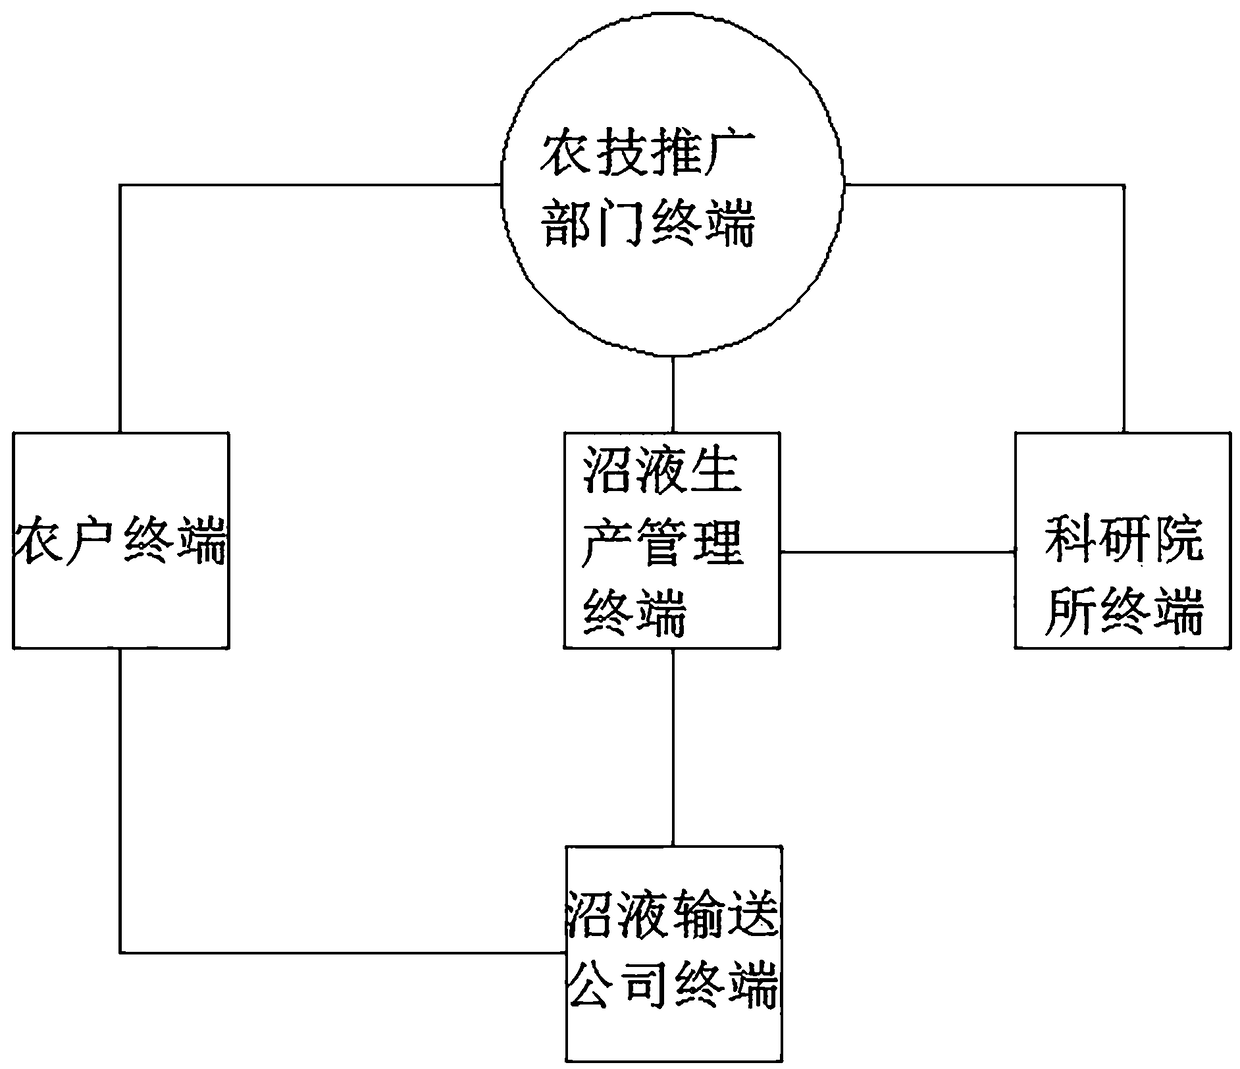 Method for storing and utilizing biogas slurry of livestock and poultry by virtue of winter idle rice fields and management system